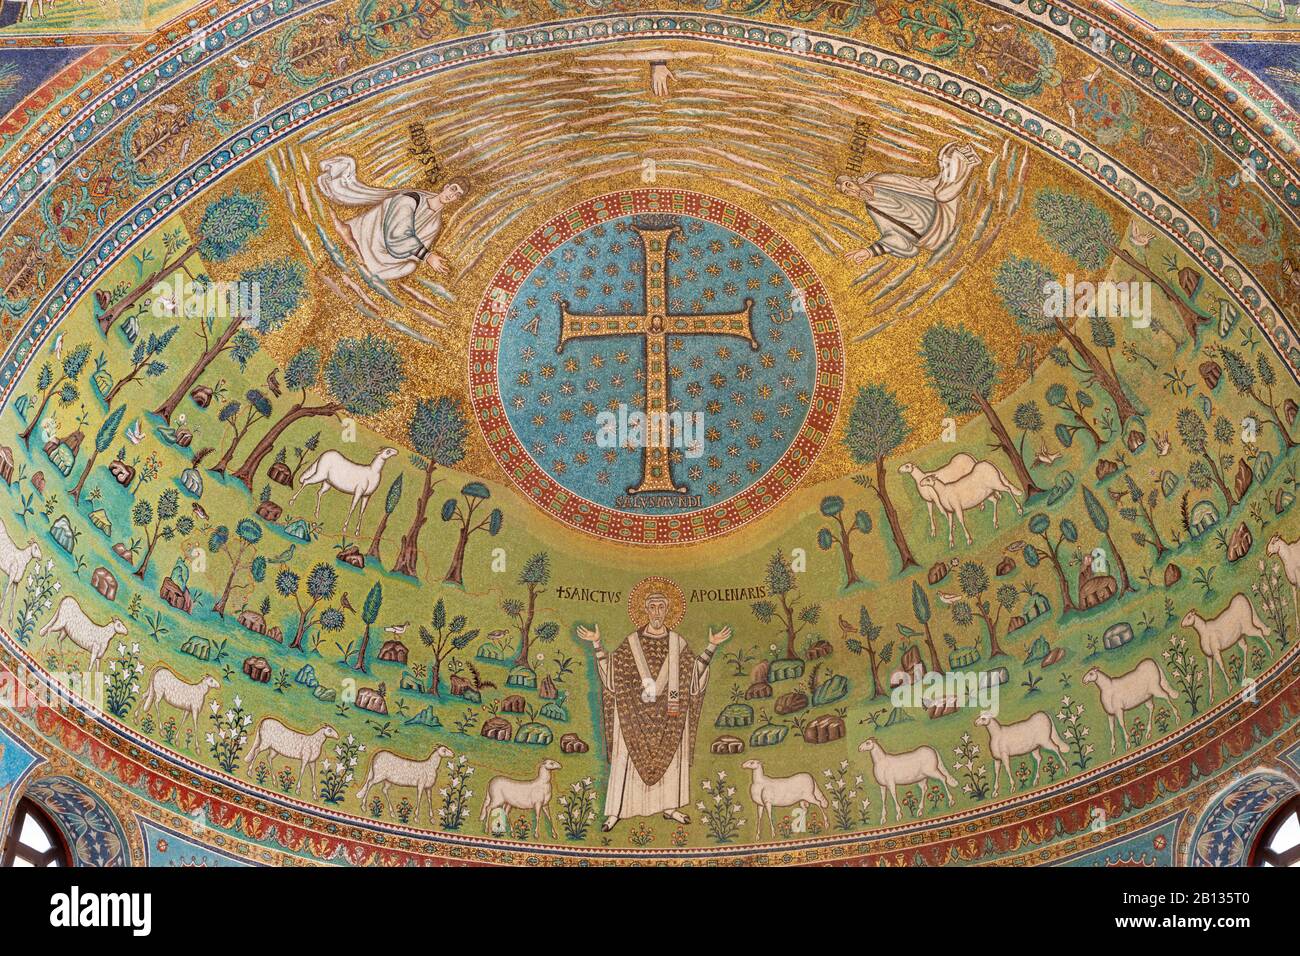 RAVENNA, ITALY - JANUARY 29, 2020: The mosaic in the main apse with the early christian cross and symbolic in church Basilica of Sant Apolinare. Stock Photo